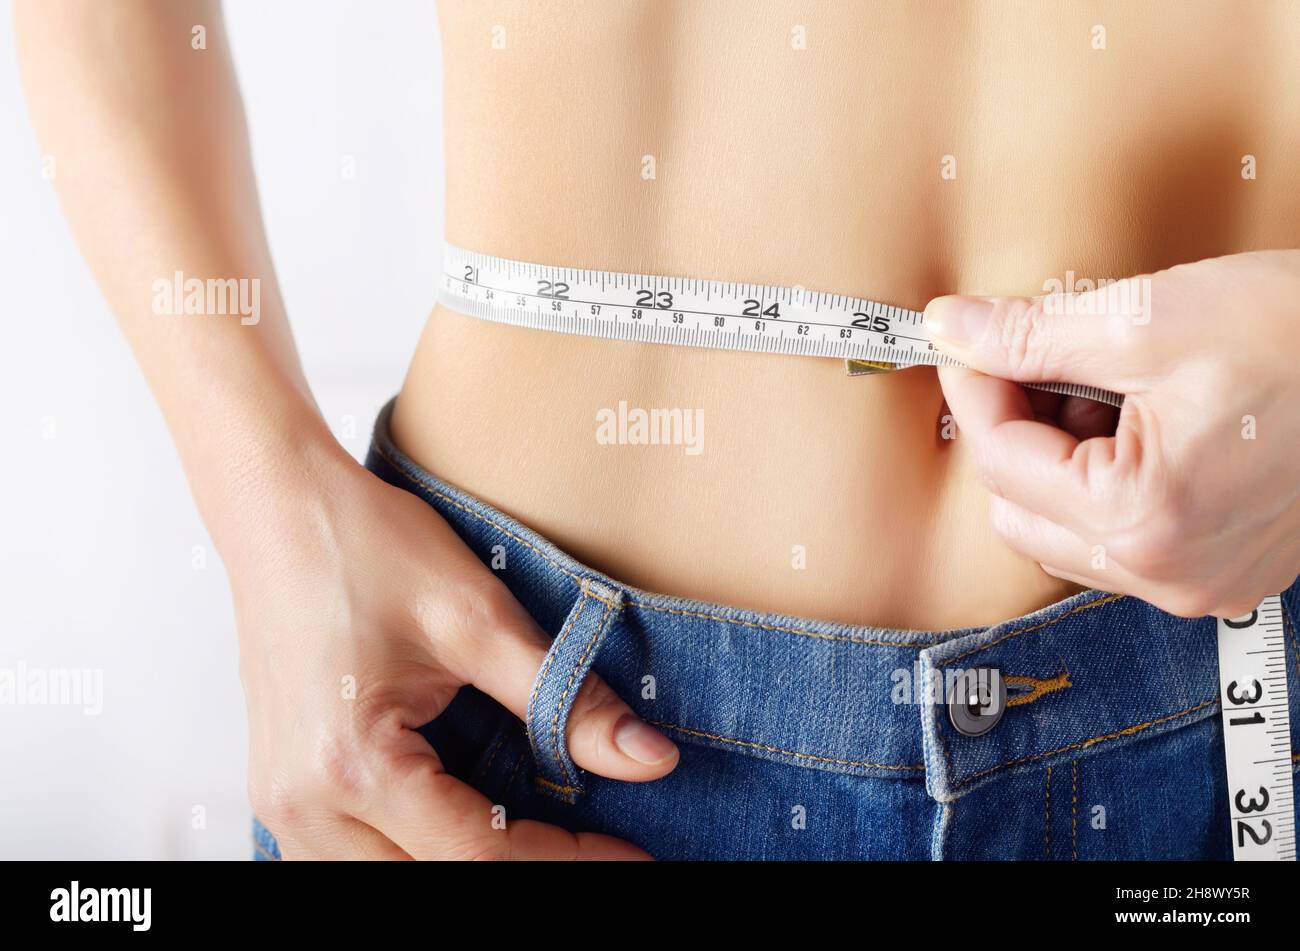 Caucasian female model in blue jeans with tape measure showing her flat stomach. Healthy lifestyle and Weightloss concept. Stock Photo